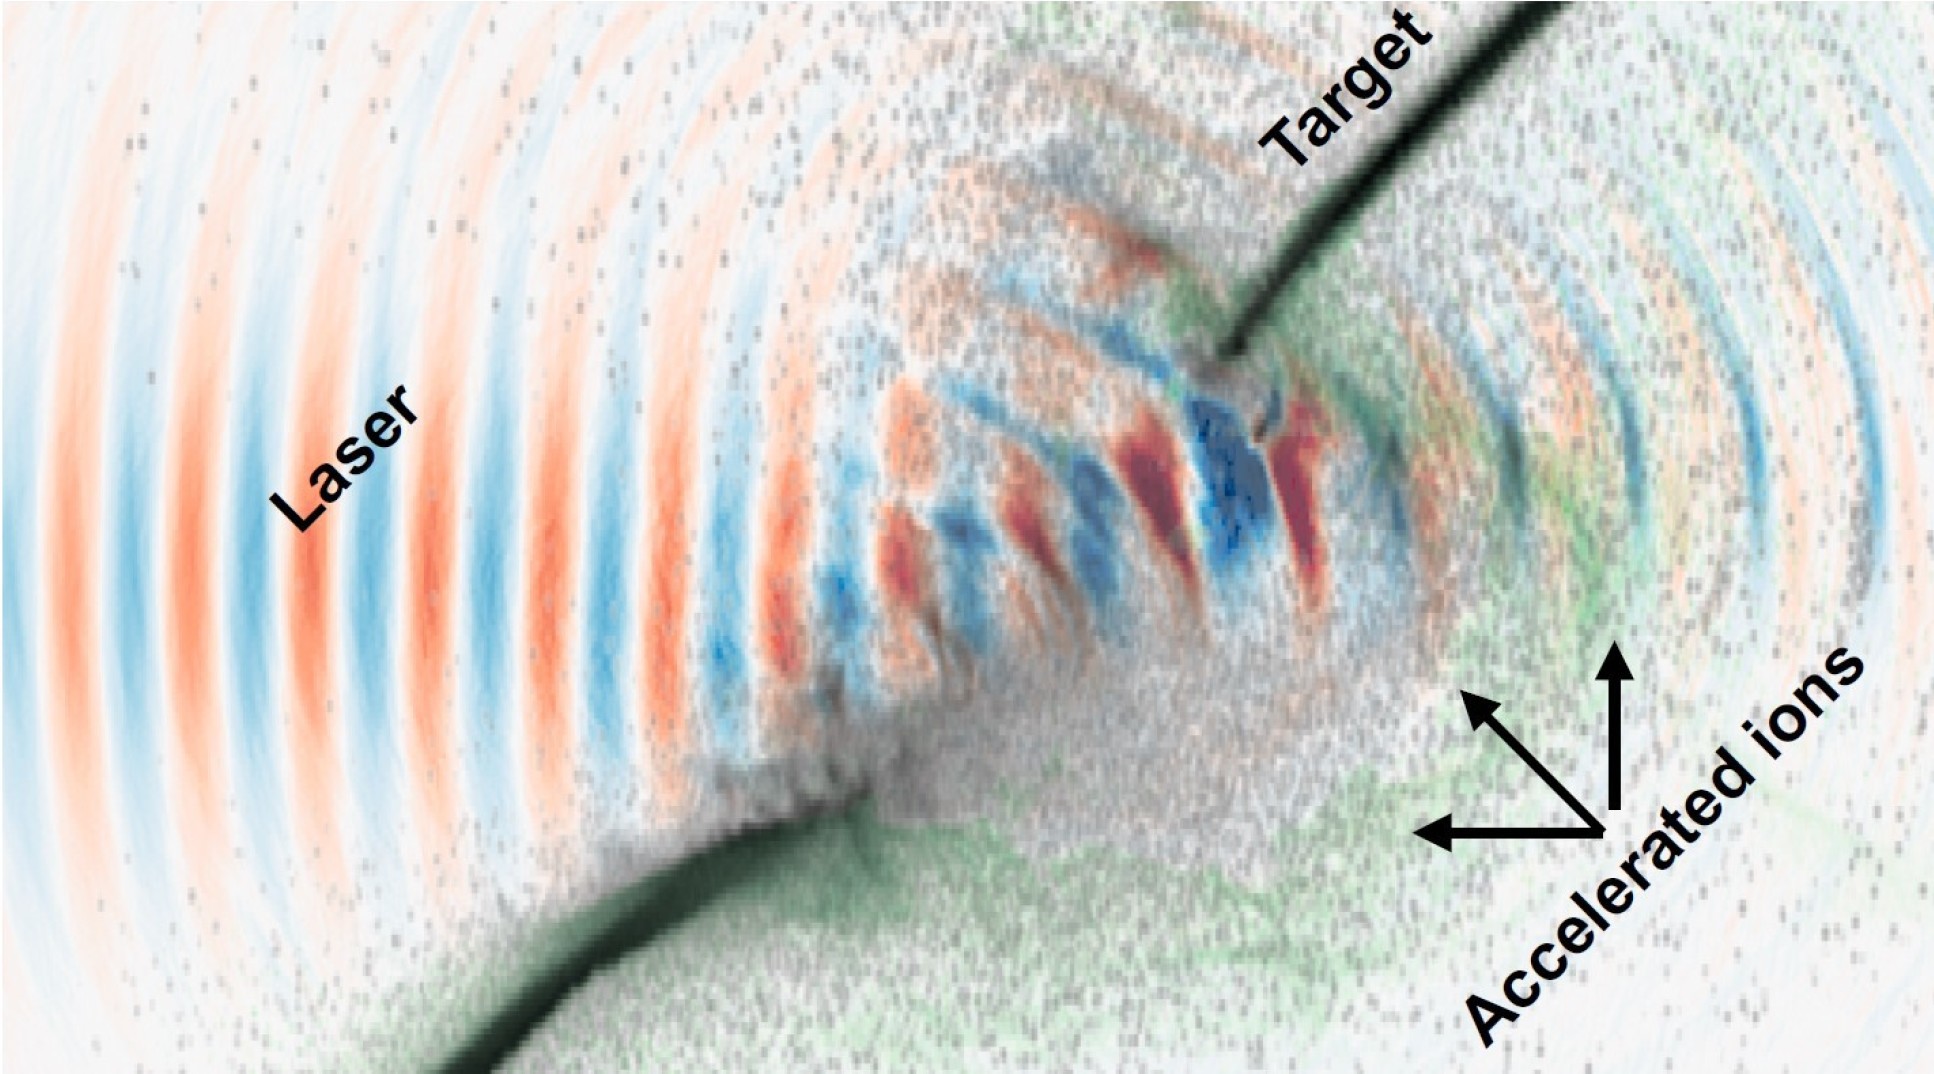 A black fuzzy line (labelled target) intersected by a blue and red wave pattern (labelled laser), with green dots coming off (labelled accelerated ions)